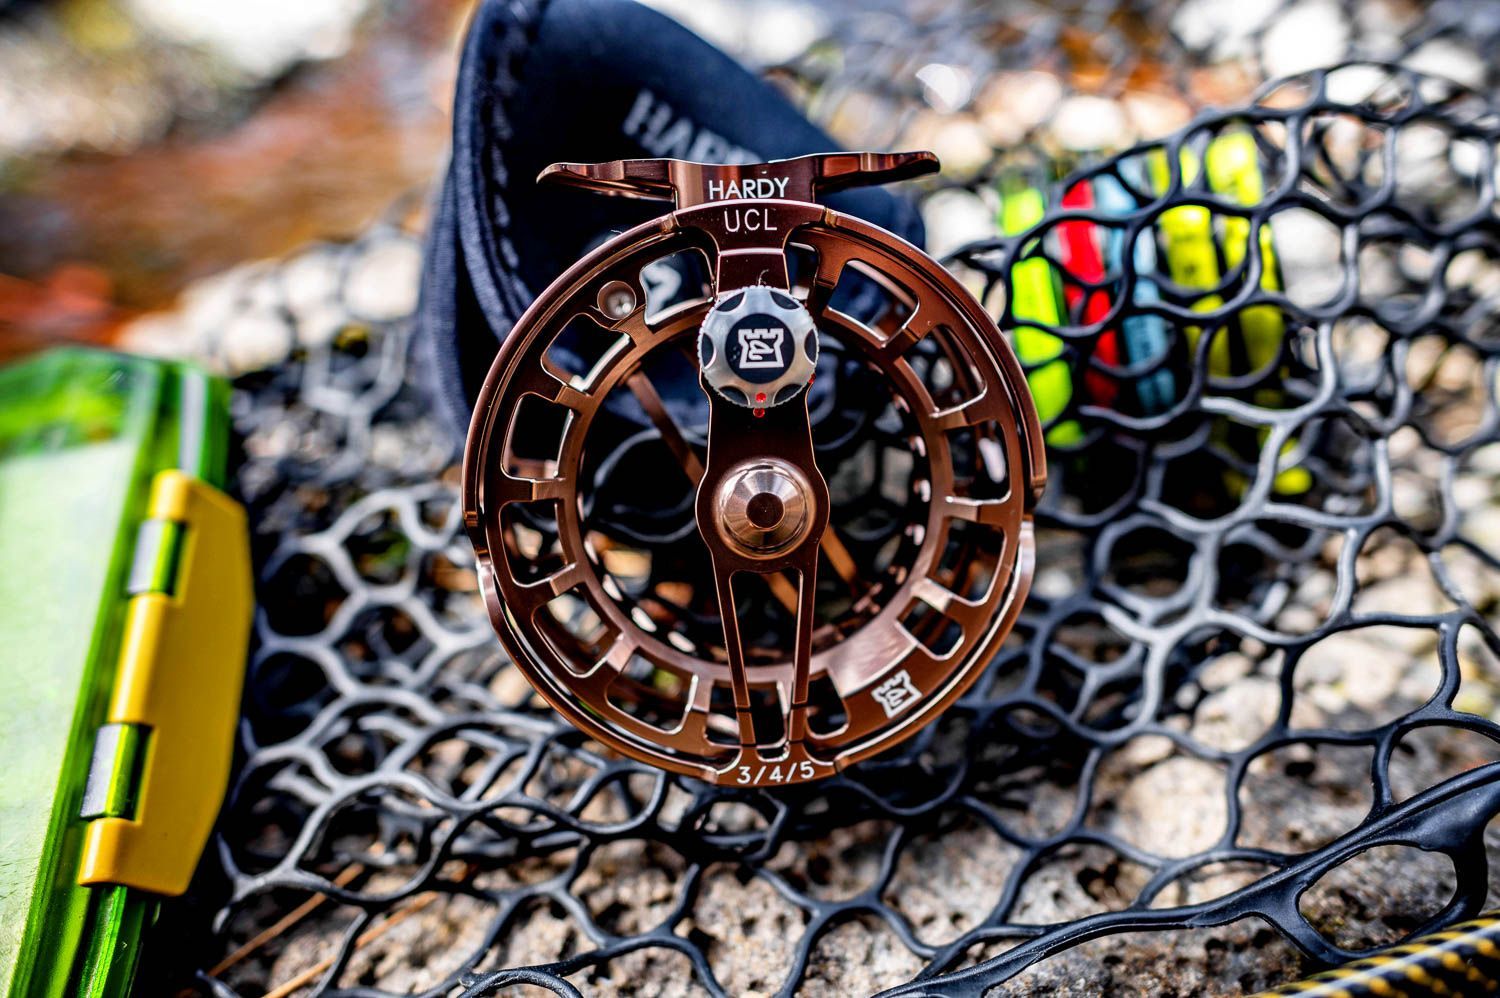 Hardy Ultraclick UCL Fly Fishing Reel - Best 5wt Fly Reel For Trout